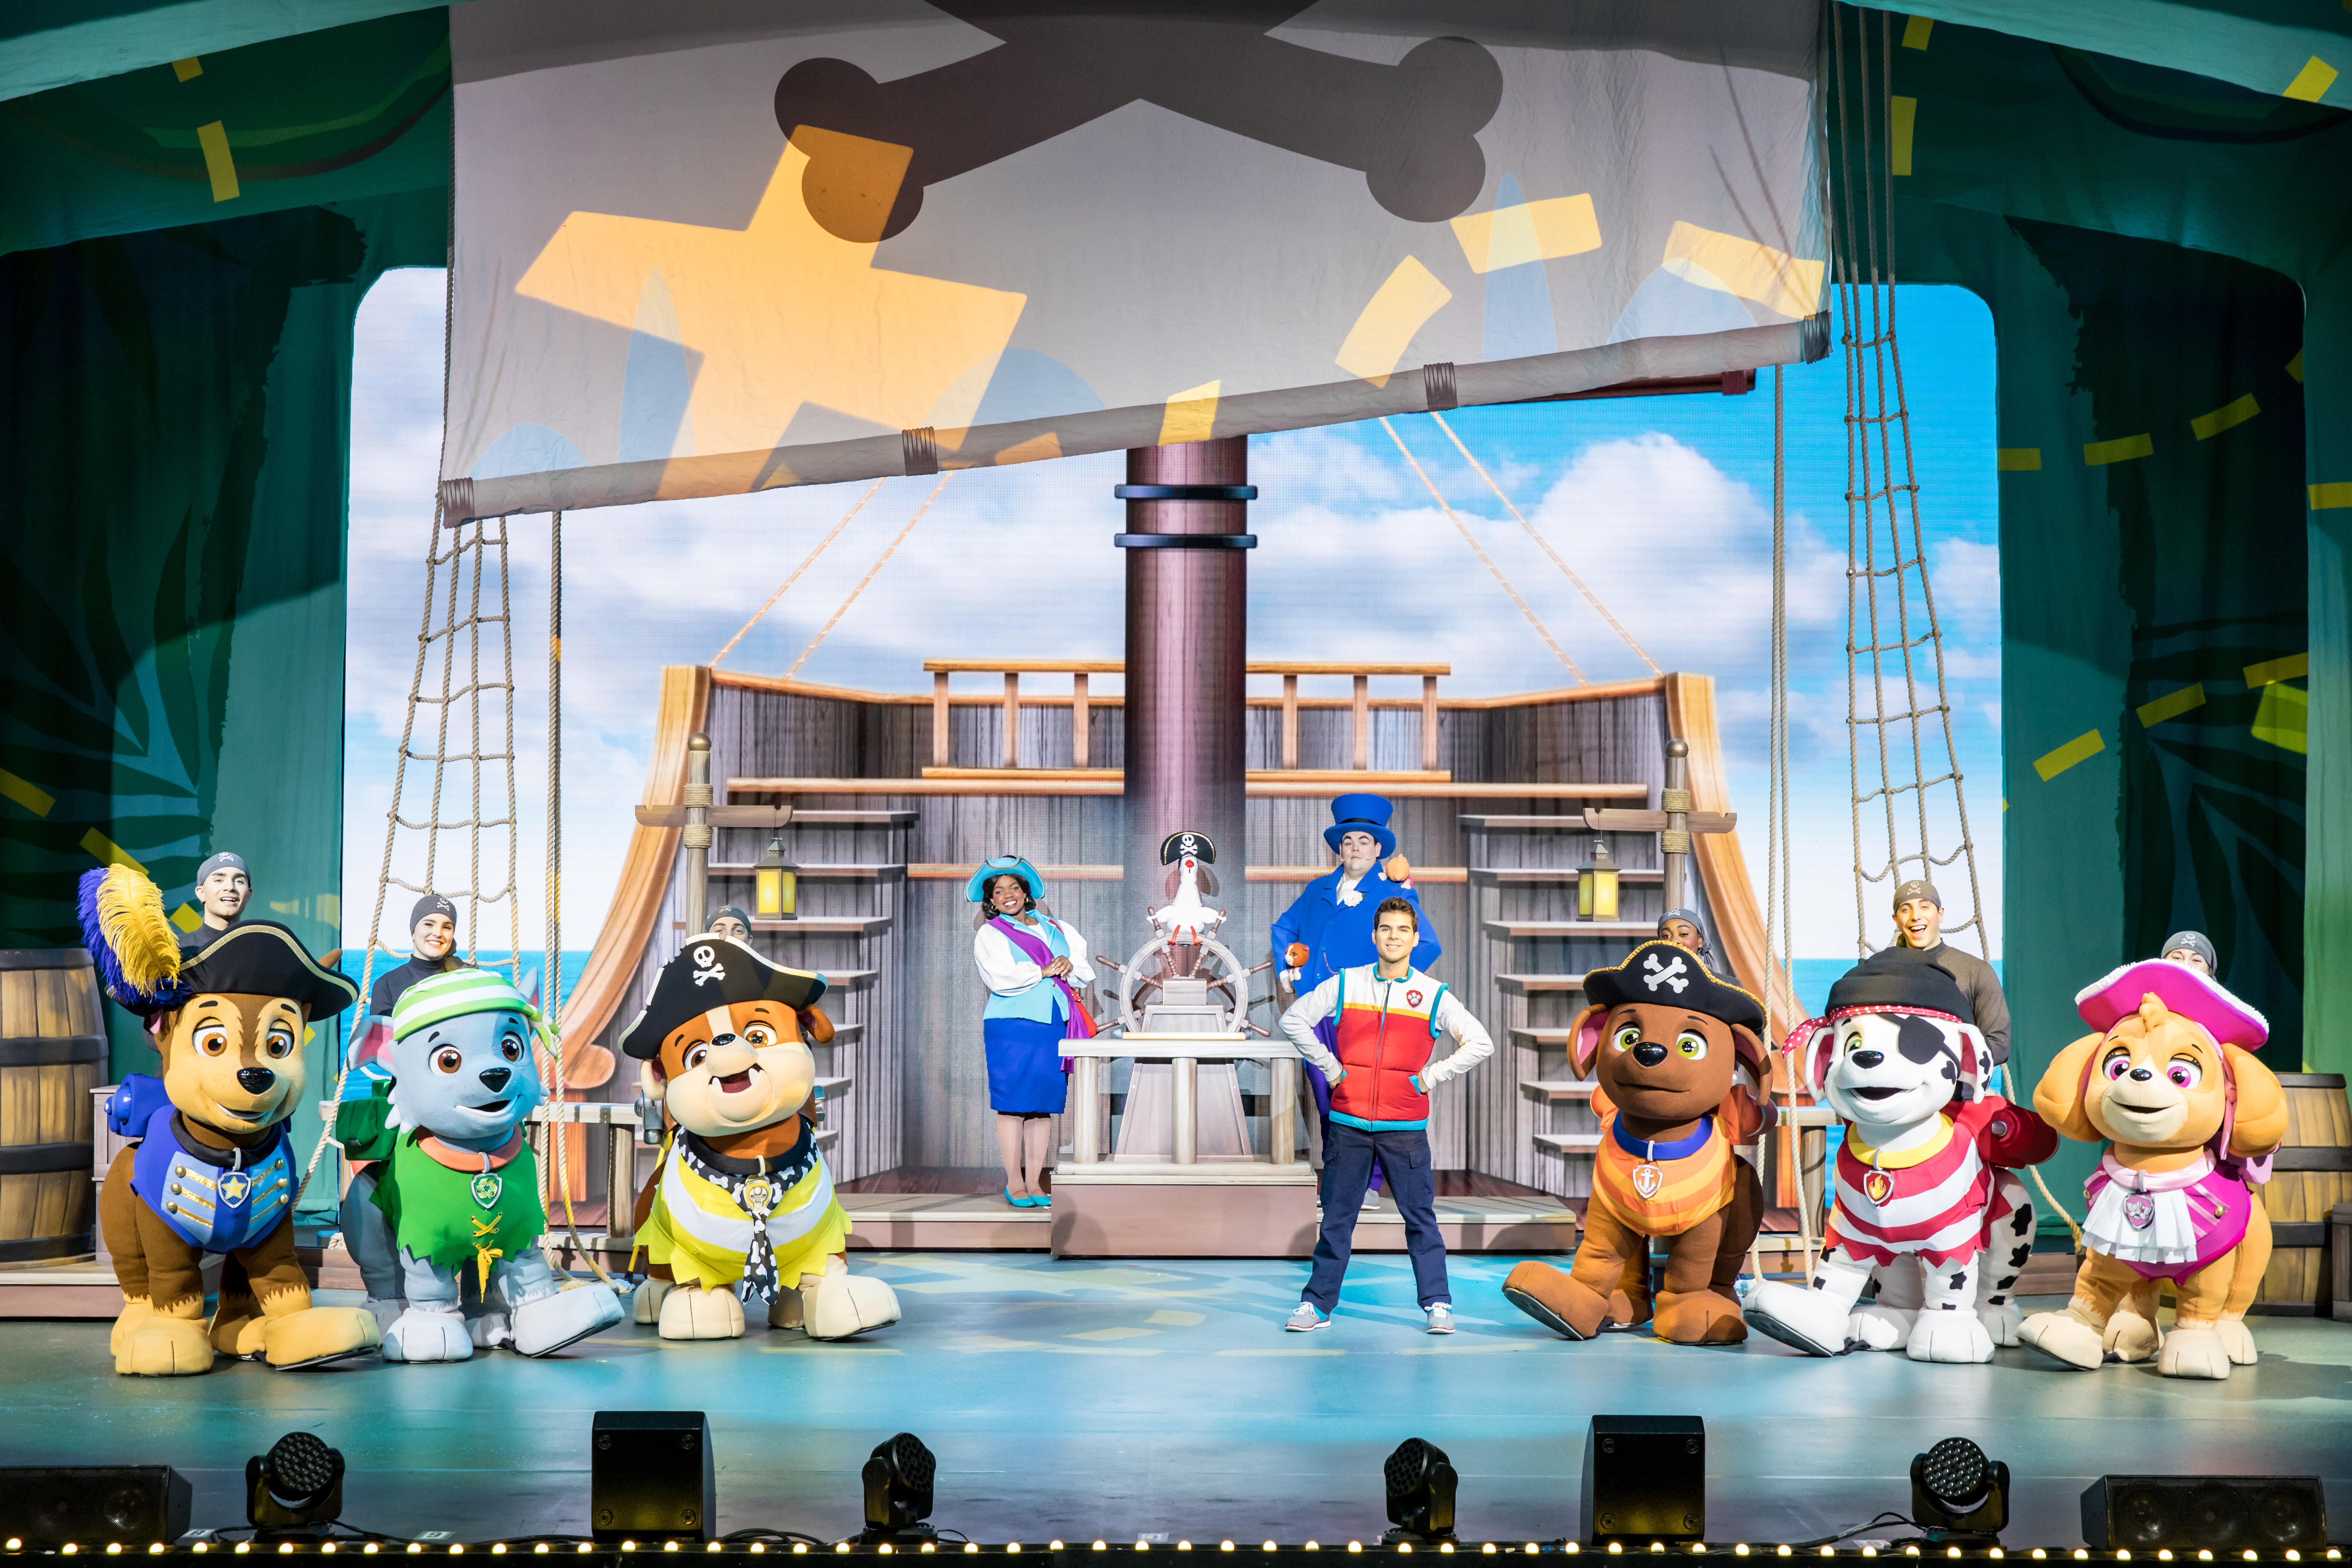 PAW Patrol Live! “The Great Pirate Adventure